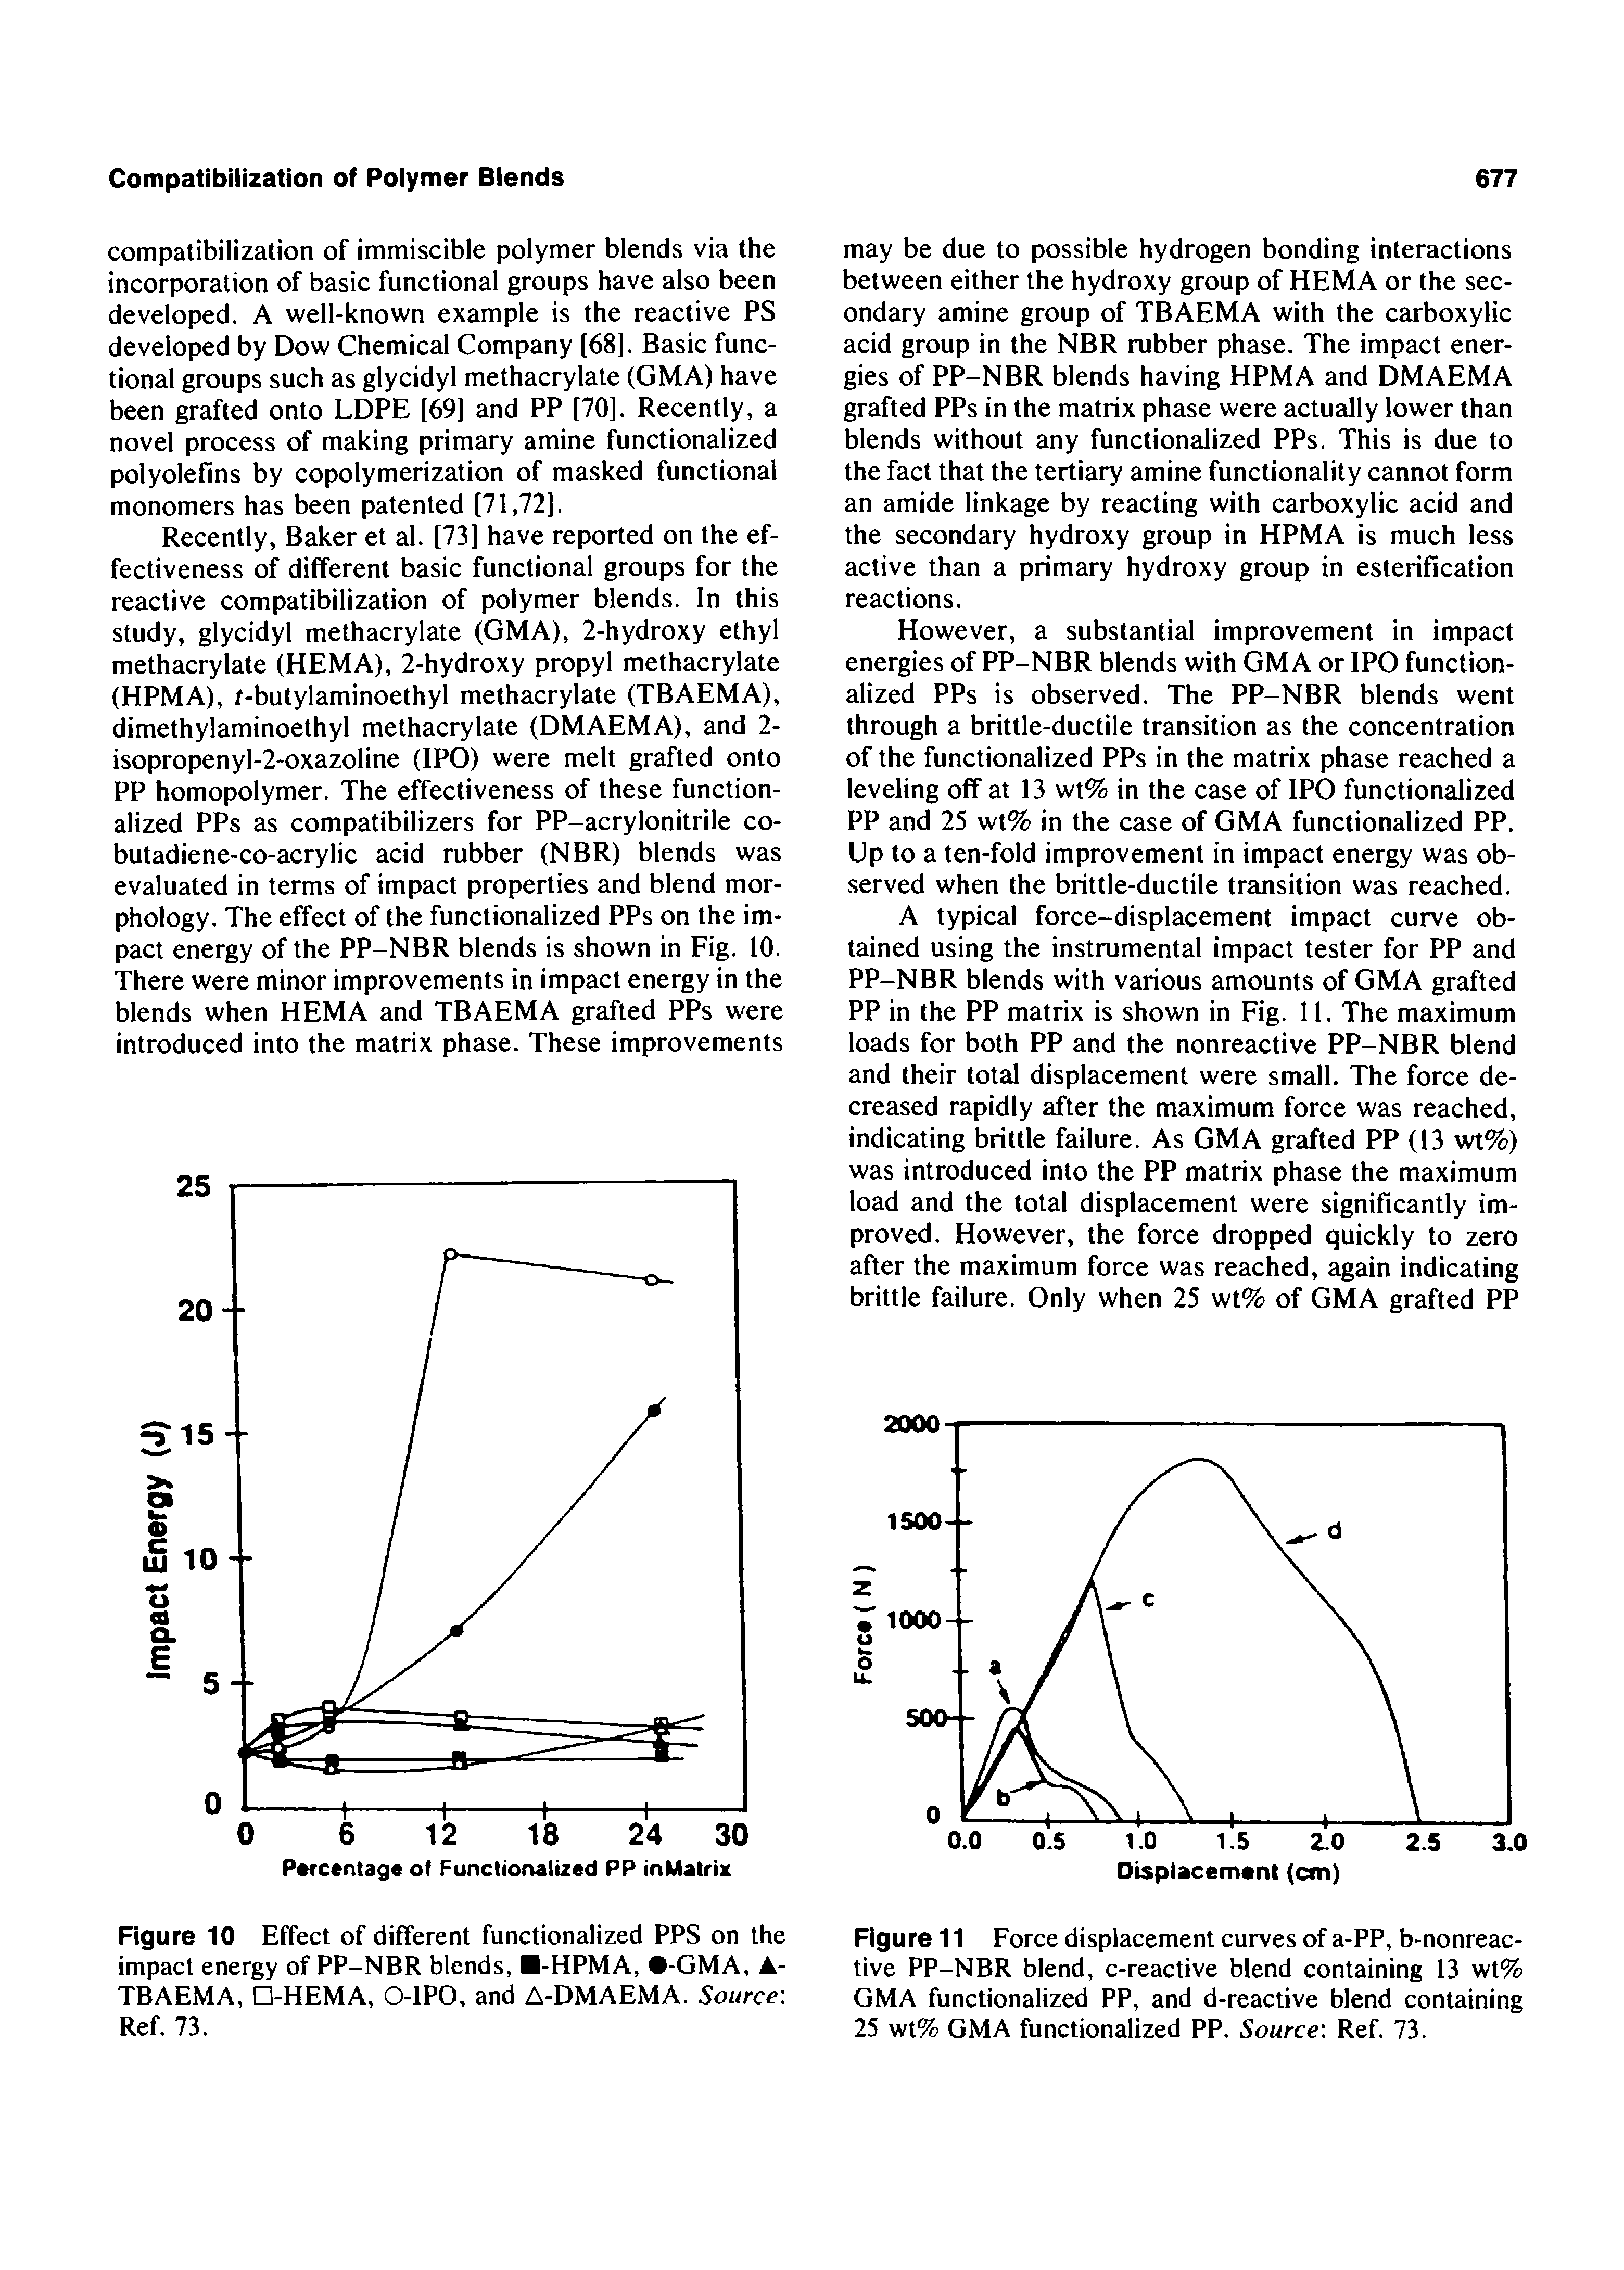 Figure 10 Effect of different functionalized PPS on the impact energy of PP-NBR blends, B-HPMA, -GMA, A-TBAEMA, D-HEMA, O-IPO, and A-DMAEMA. Source Ref. 73.